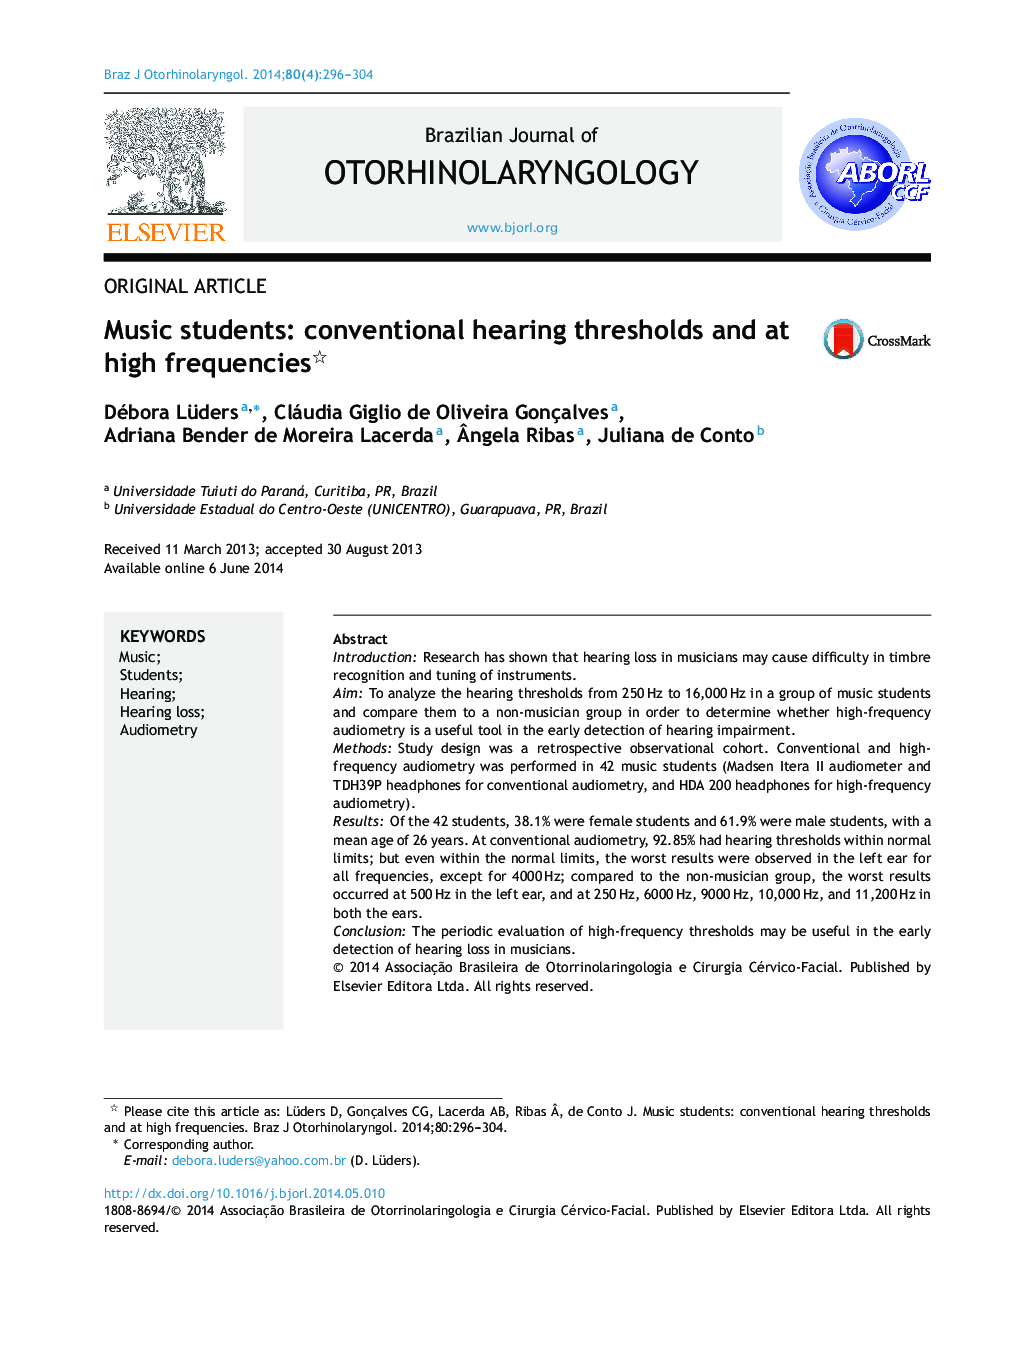 Music students: conventional hearing thresholds and at high frequencies 